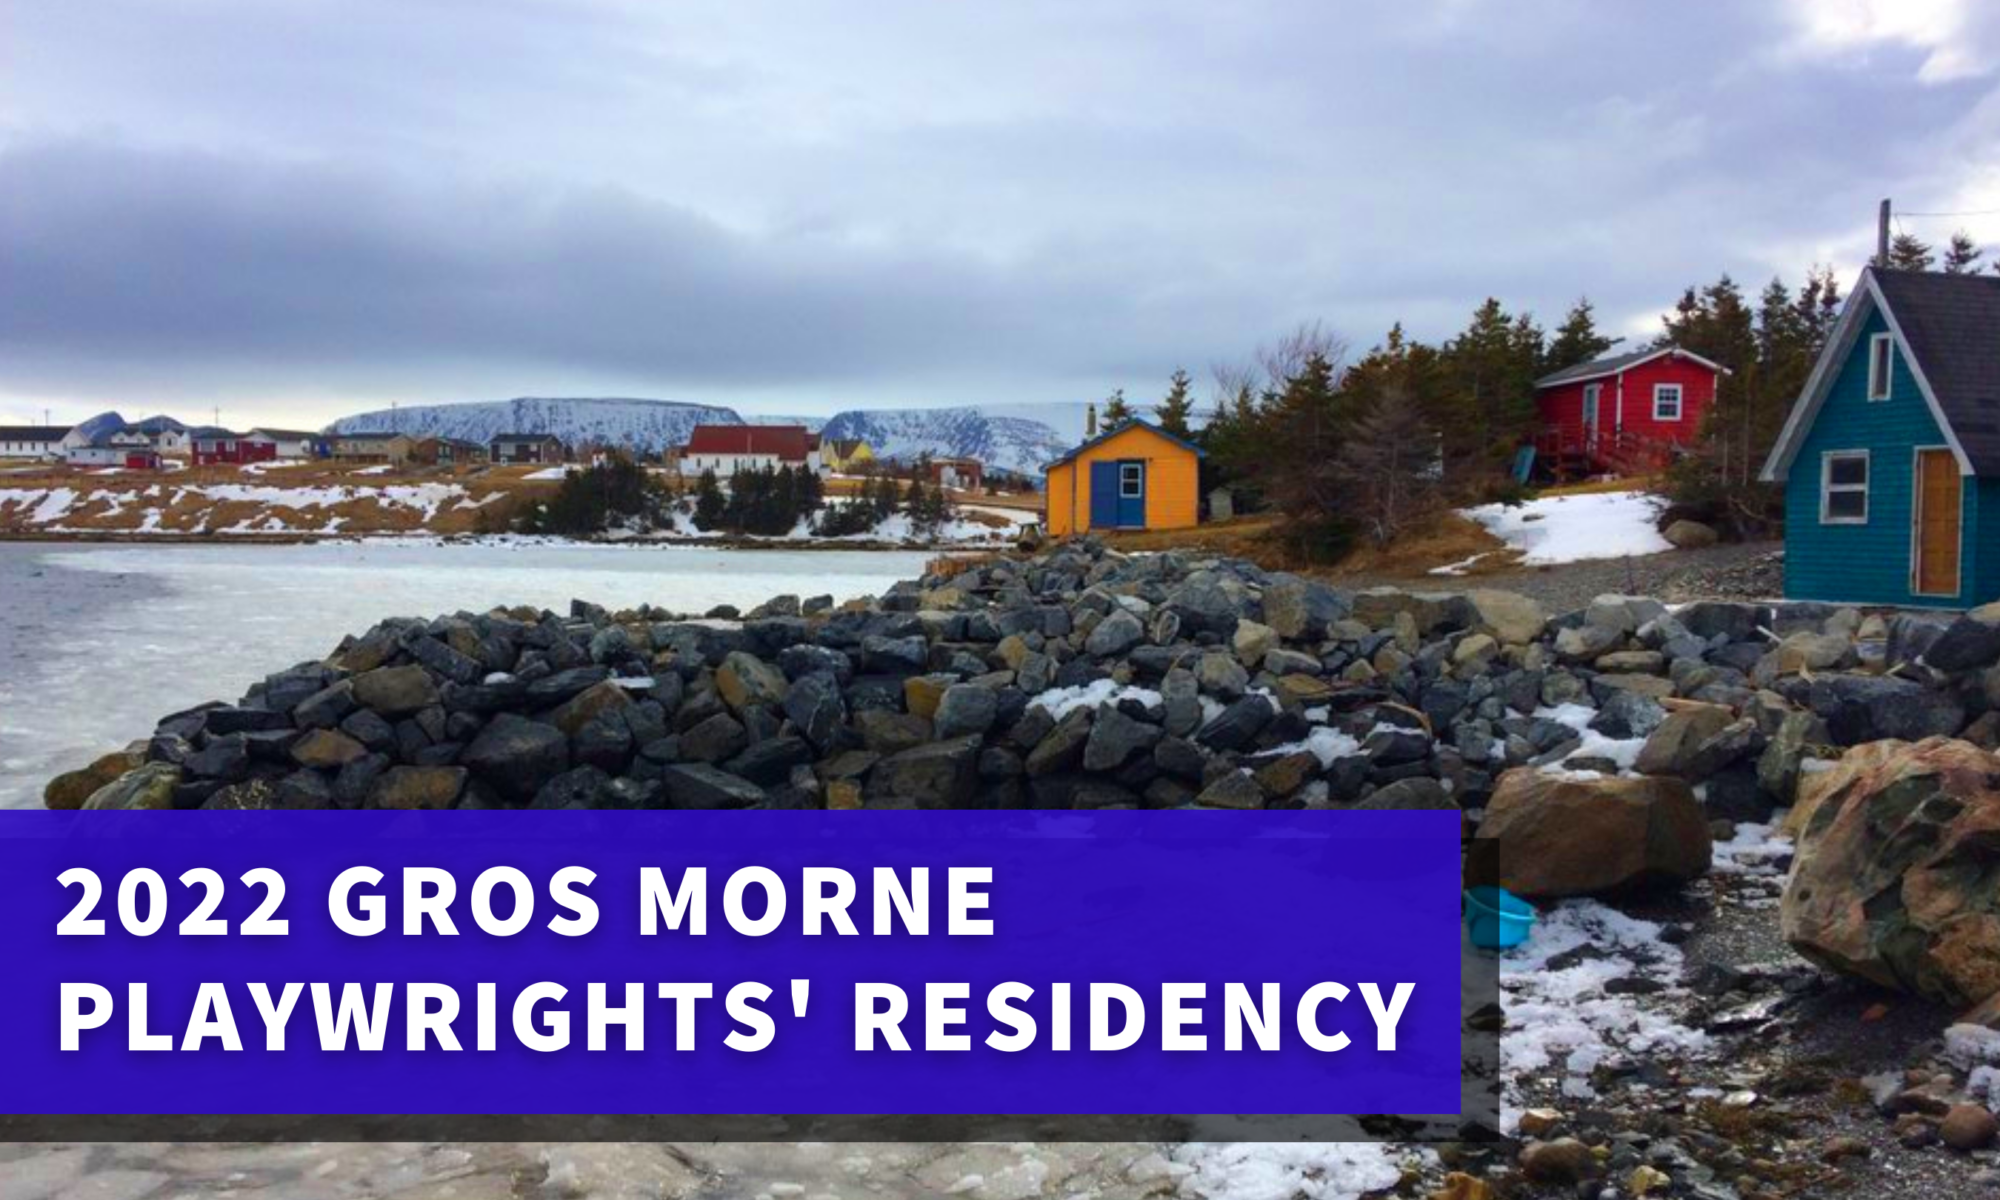 Image of a shoreline in Gros Morne featuring colourful salt box houses. The image has a blue banner with white text which reads: “2022 Gros Morne Playwrights’ Residency”